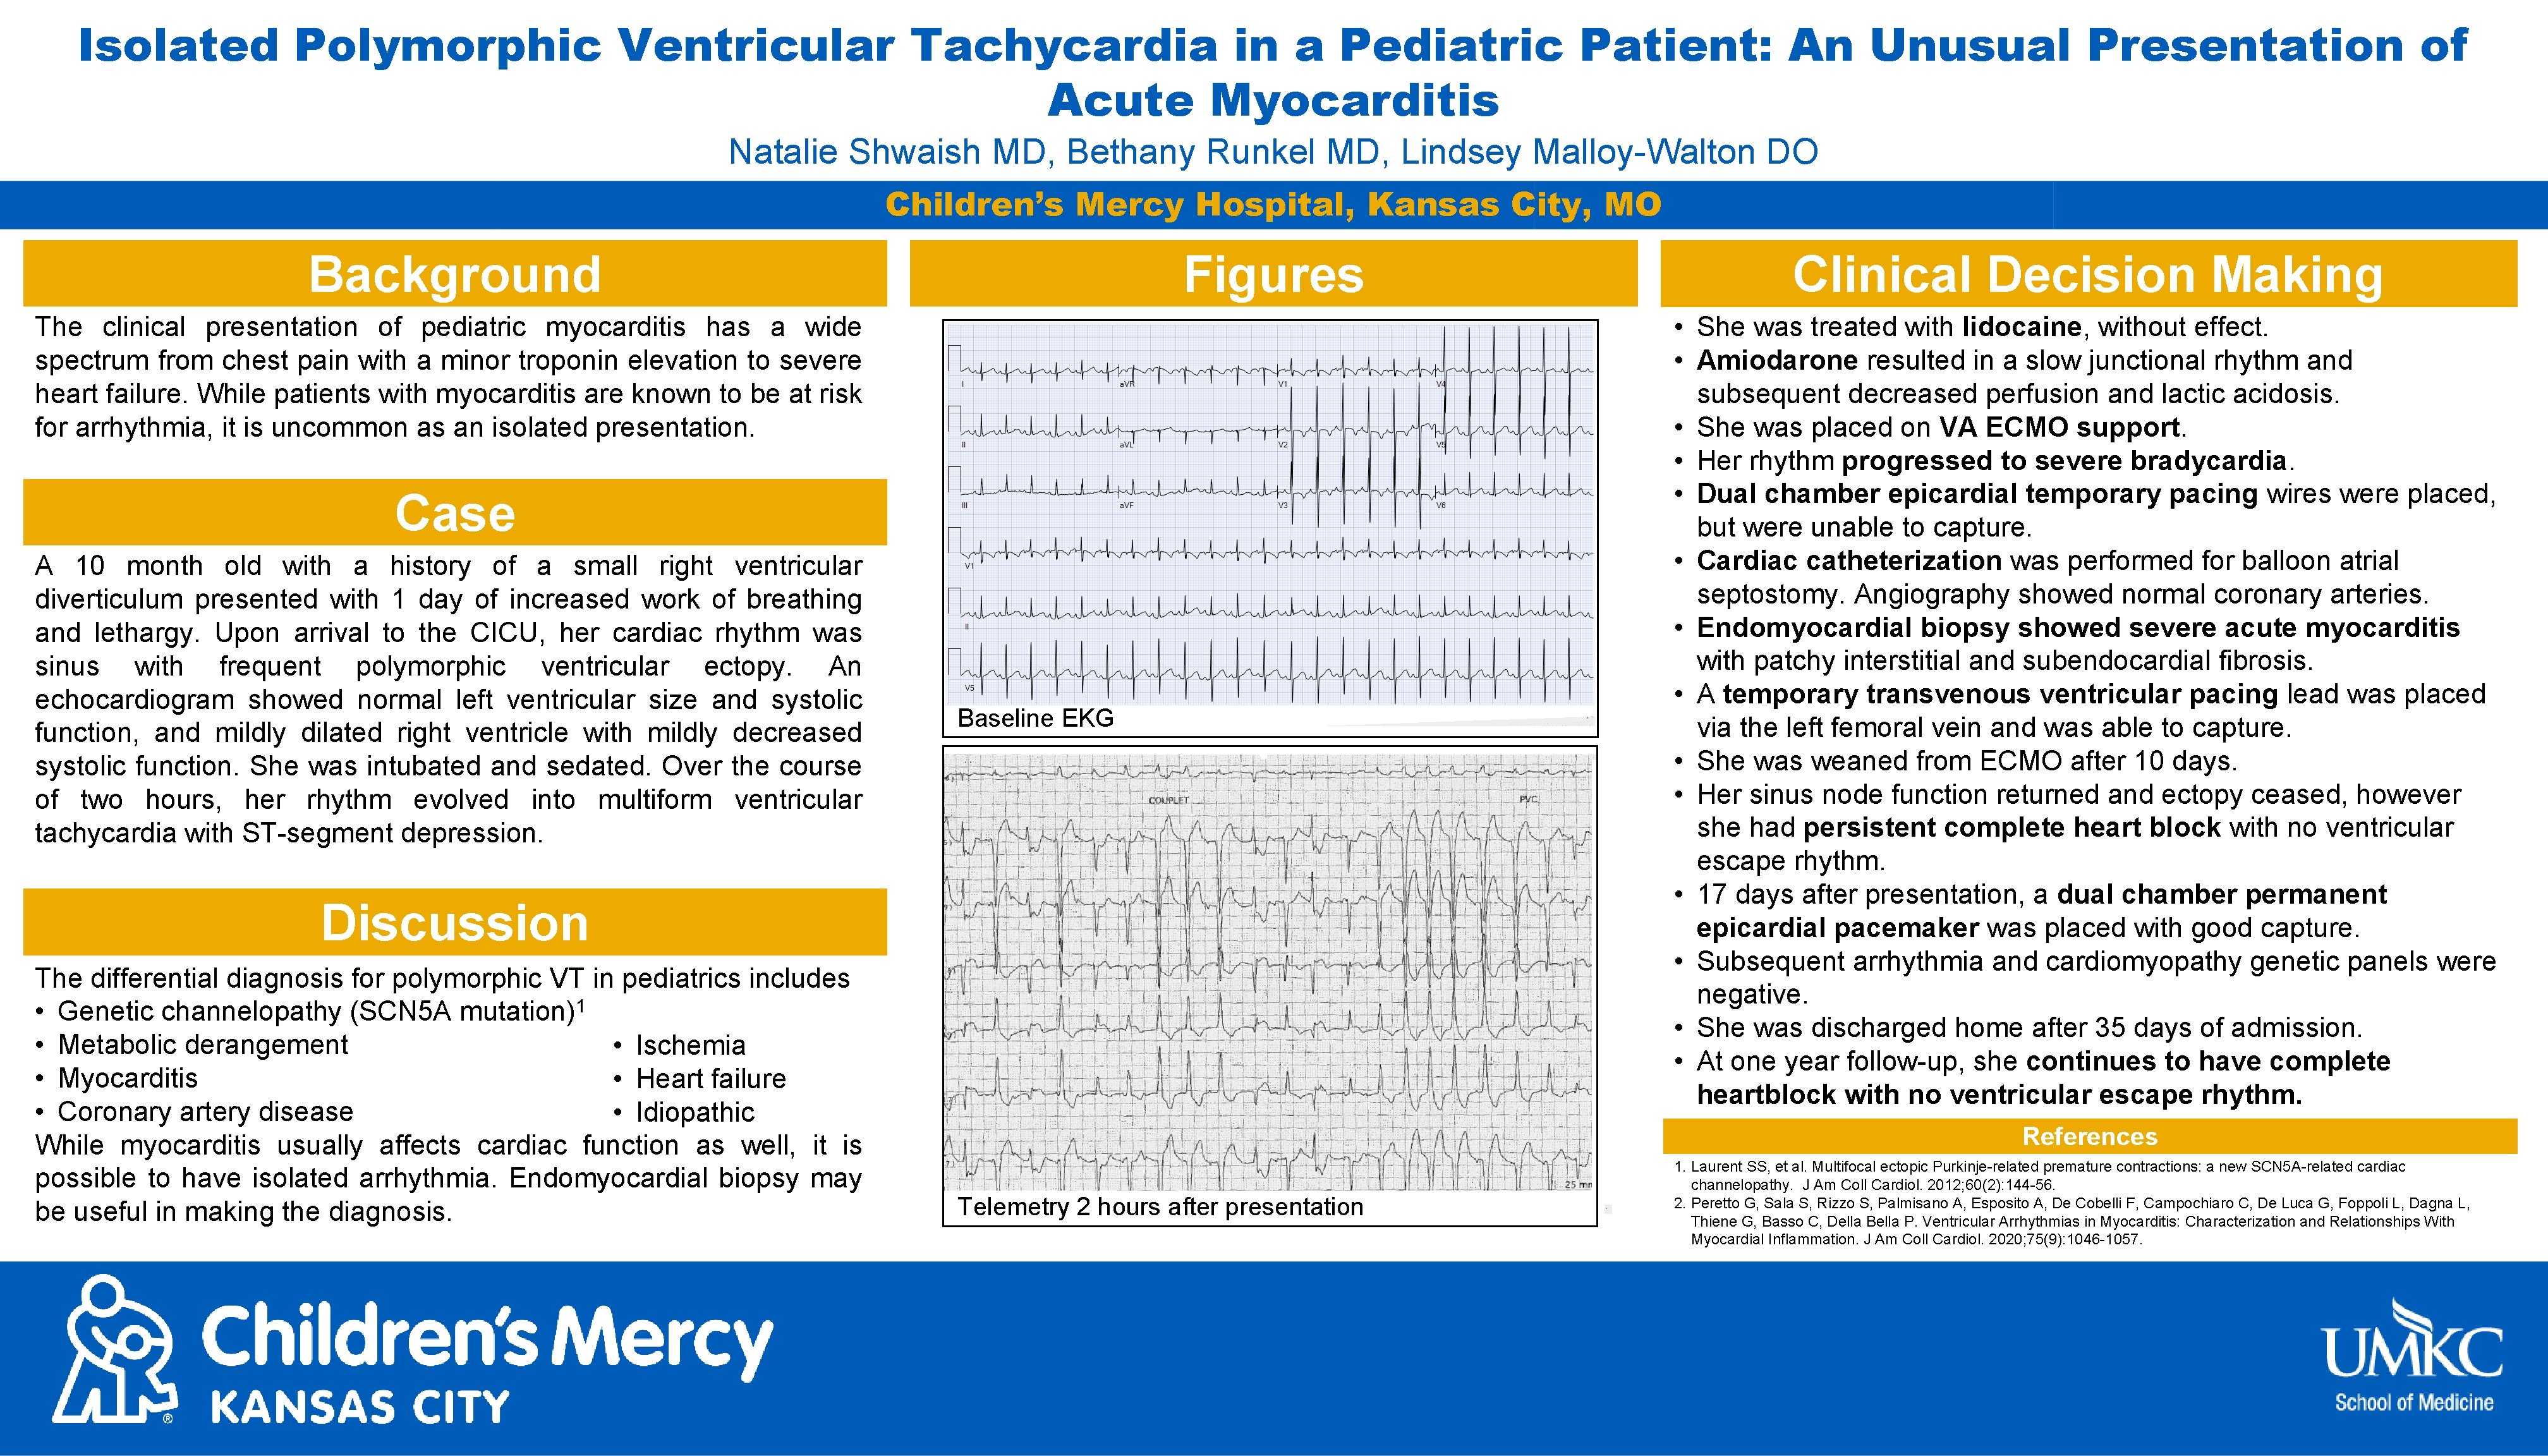 Isolated Polymorphic Ventricular Tachycardia in a Pediatric Patient: An Unusual Presentation of Acute Myocarditis